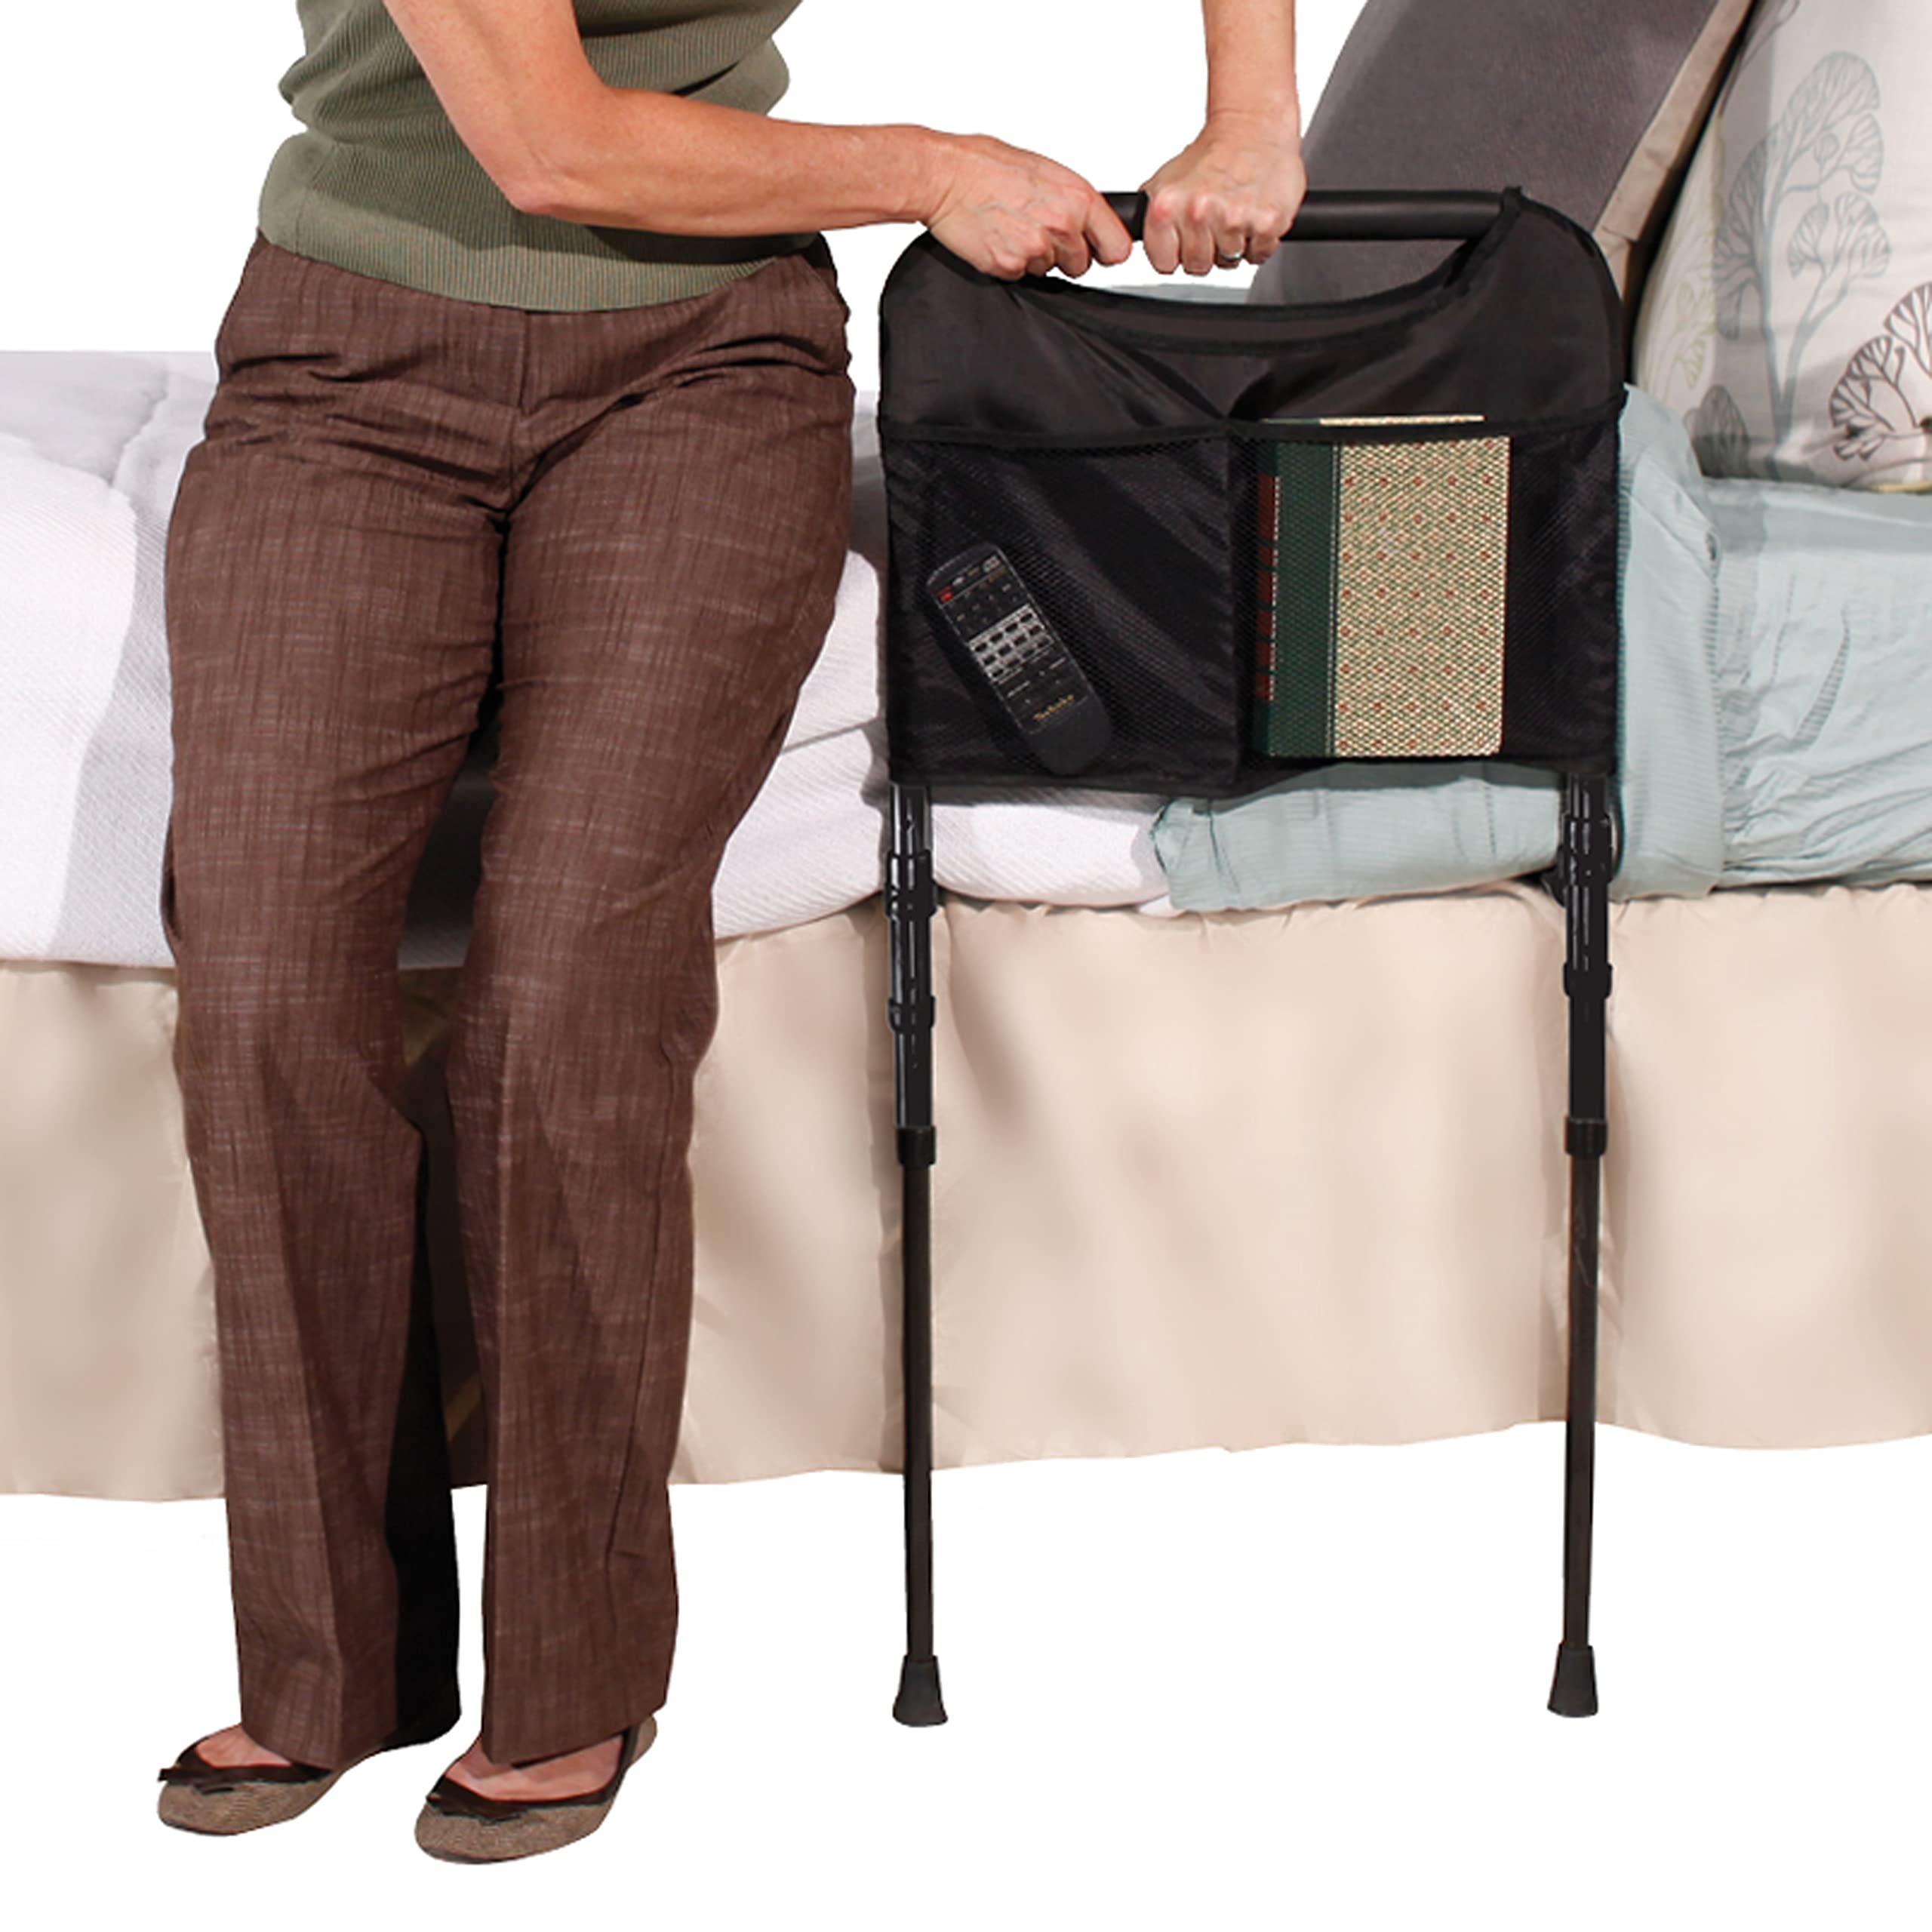 Able Life Sturdy Bed Rail, Adjustable Stand Assist Bed Bar with Support Legs for Fall Prevention, Bedside Rail Mobility Aid with Organizer Pouch for Adults, Seniors, and Elderly, Fits Most Beds